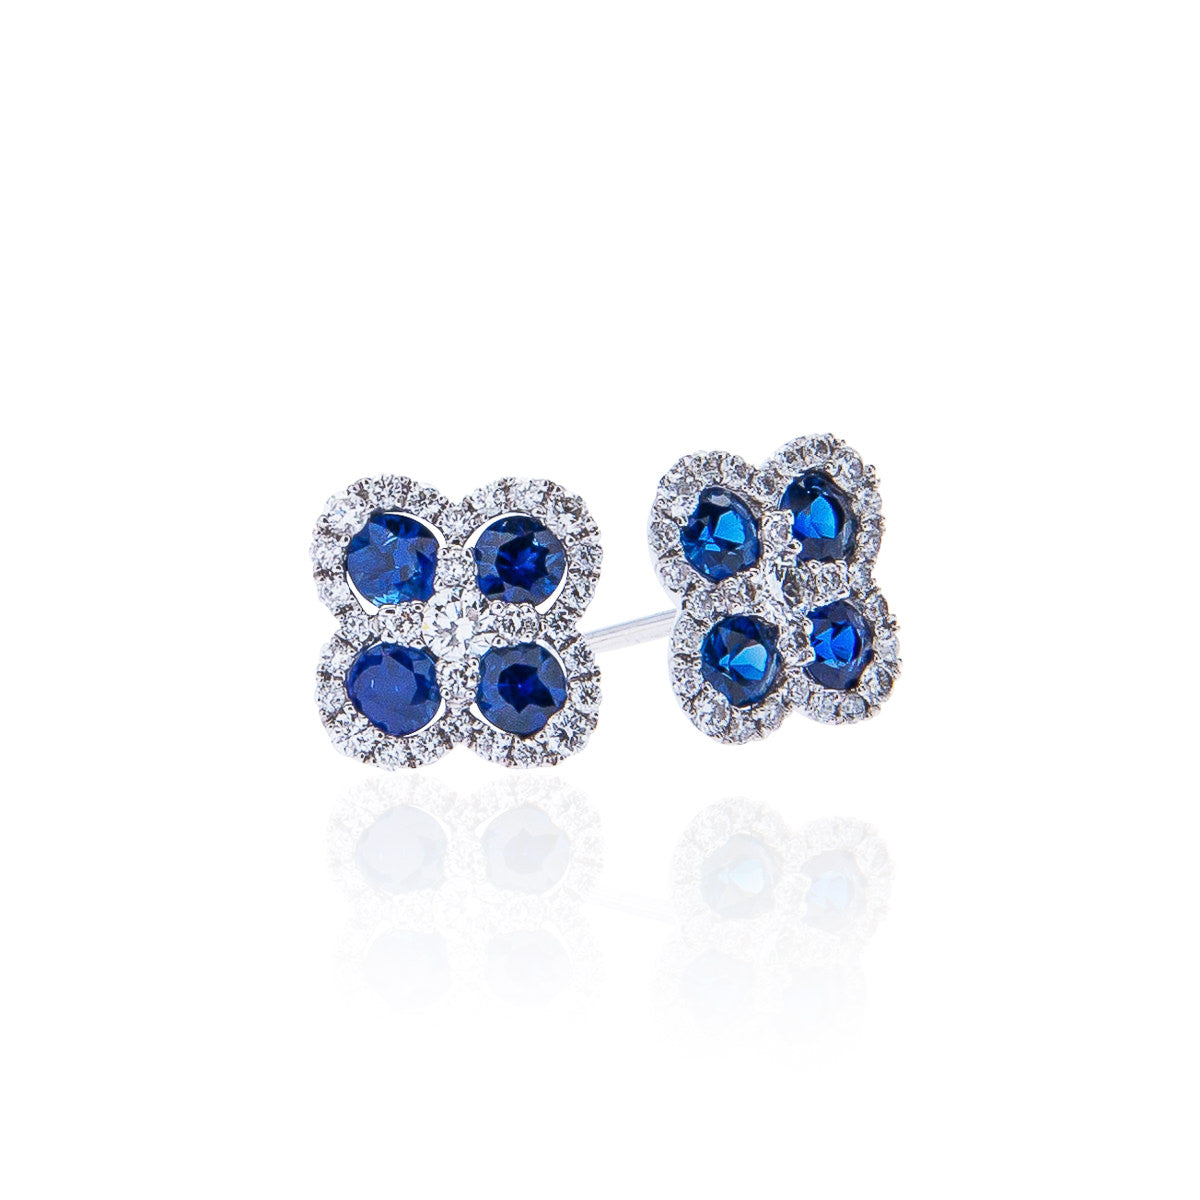 Sabel Collection 14K White Gold Sapphire and Diamond Clover Stud Earrings